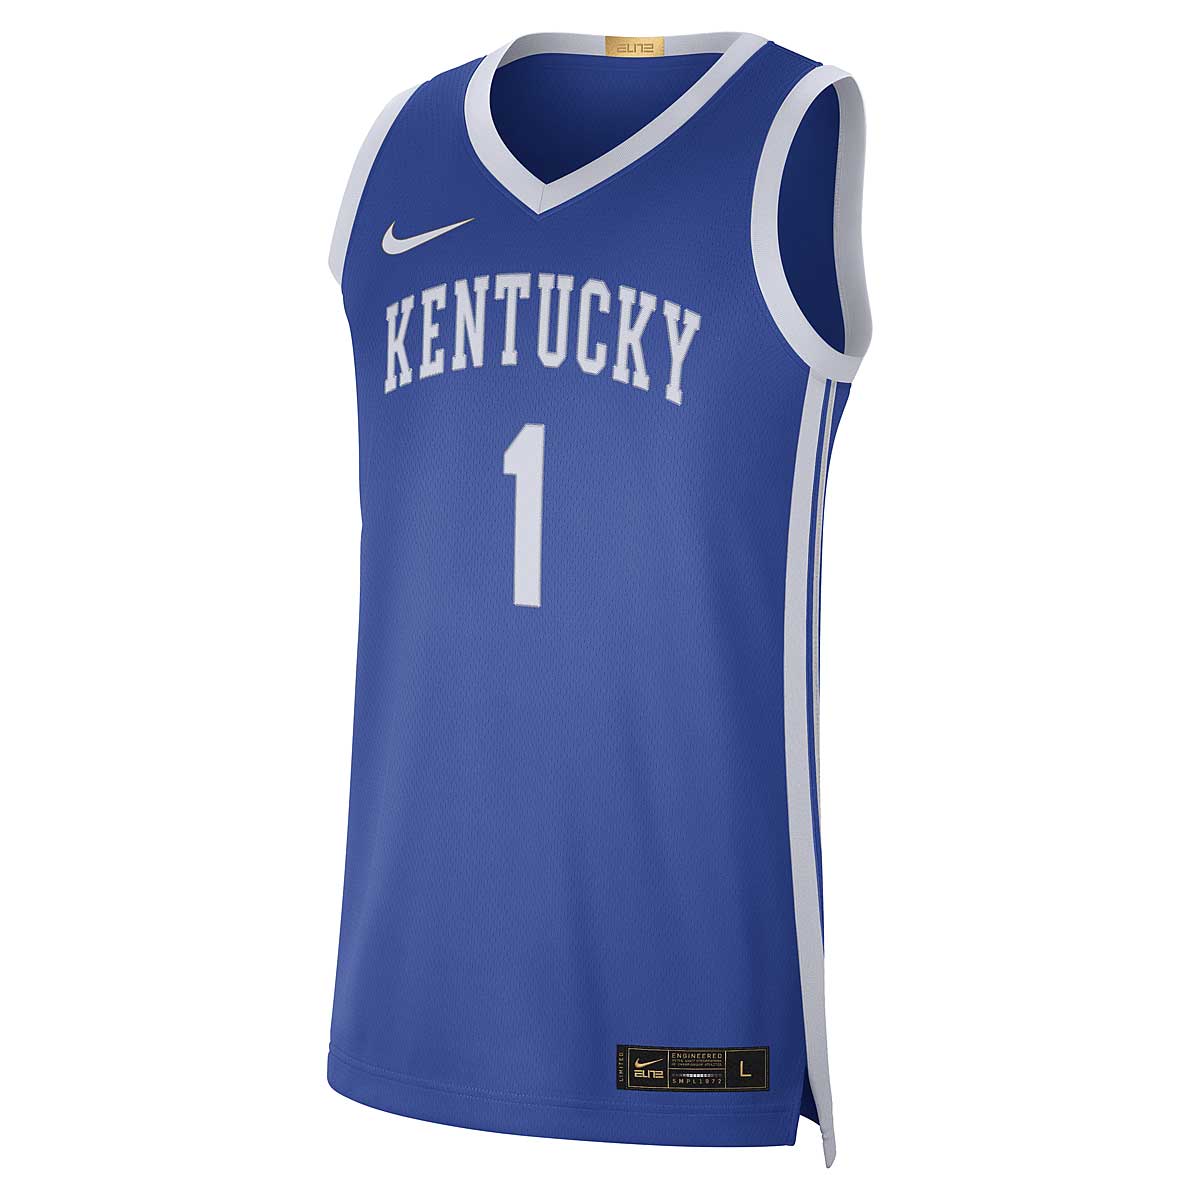 Nike Ncaa Kentucky Wildcats Dri-fit Limited Edition Jersey Devin Booker, Game Royal 3XL